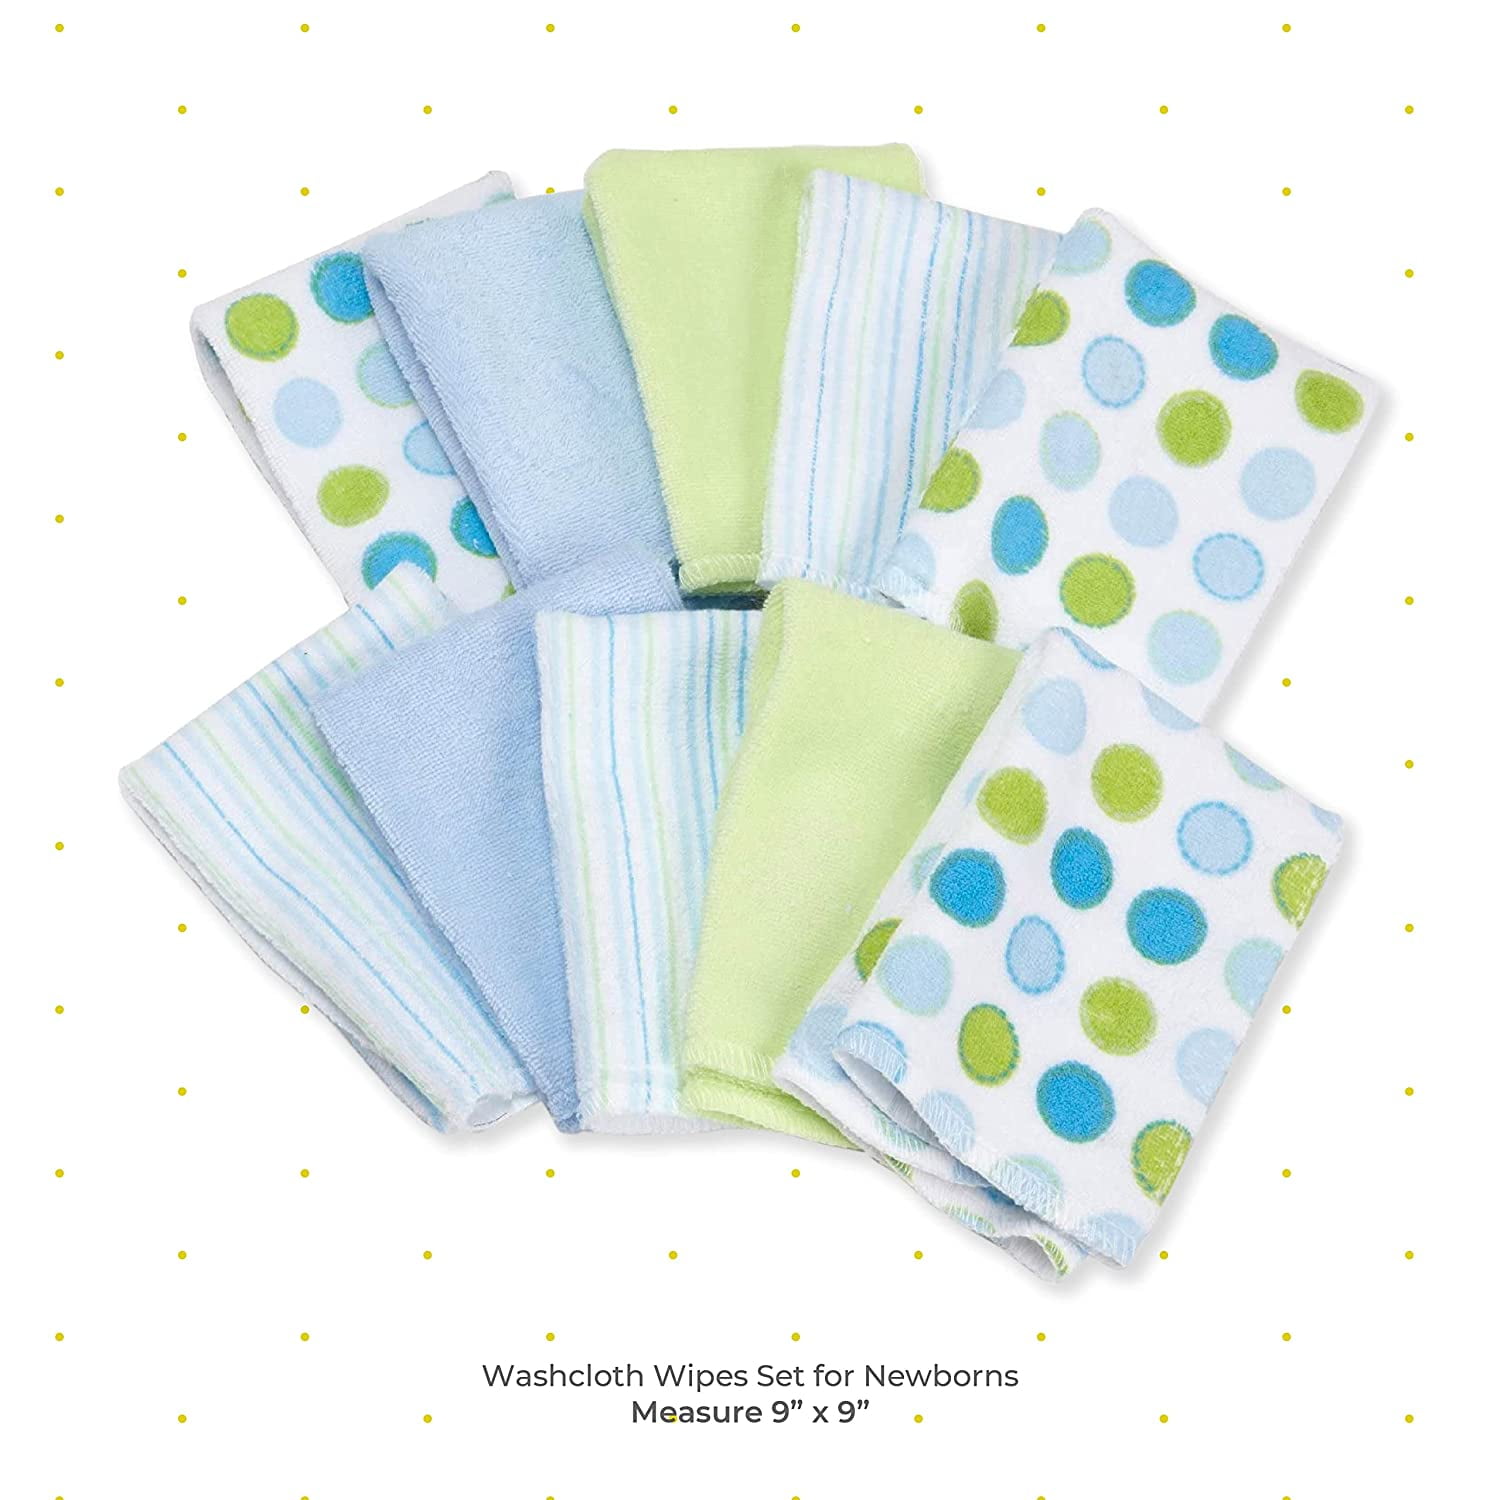 Spasilk 20 Terry Washcloth Wipes Set for Newborns and Infant Boys and  Girls, Pink, Ideal Baby Shower Gift Pack